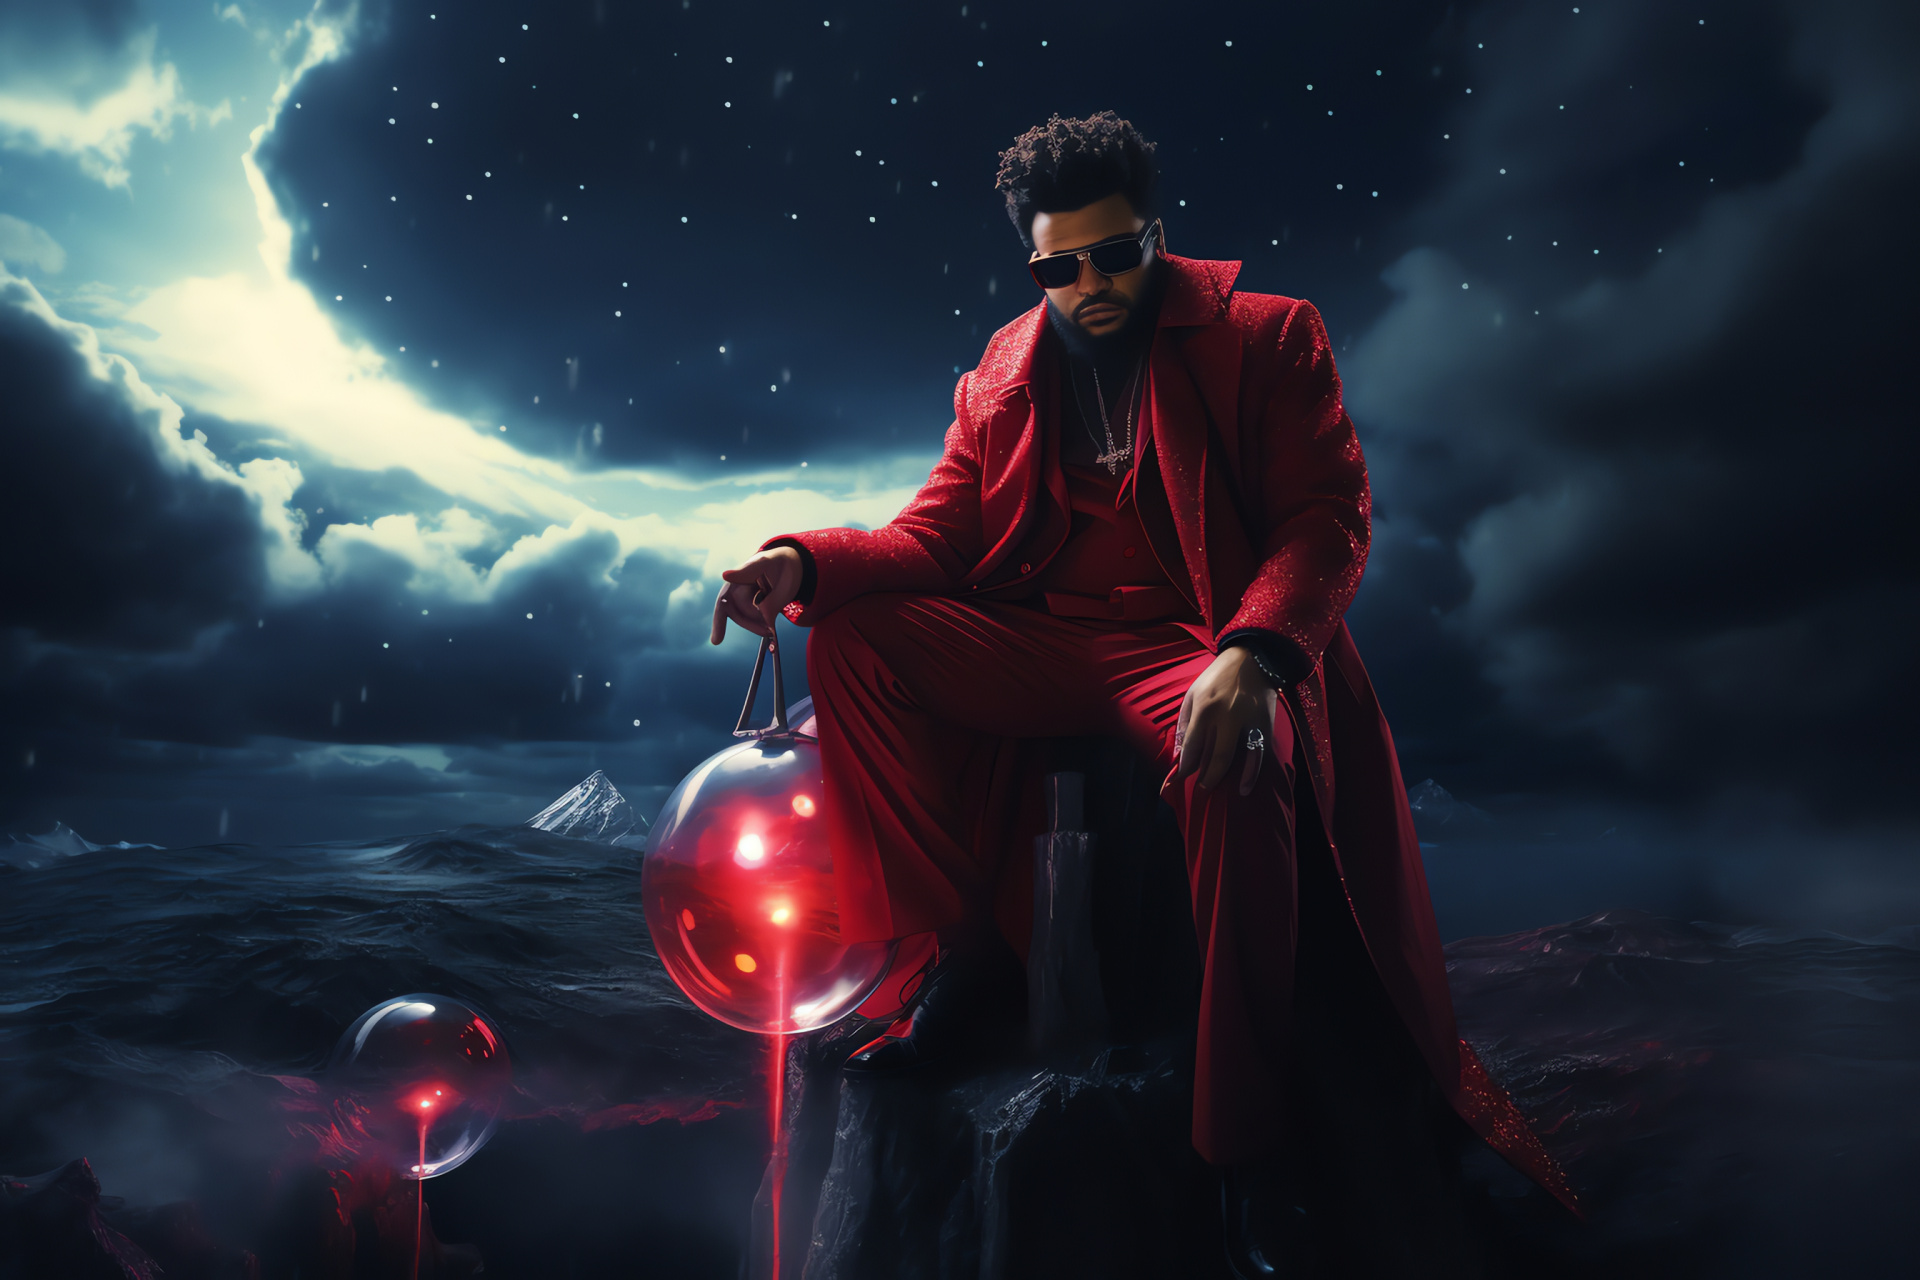 The Weeknd performer, Music artist stage outfit, Dance performance, Atmospheric phenomenon, Music production, HD Desktop Wallpaper